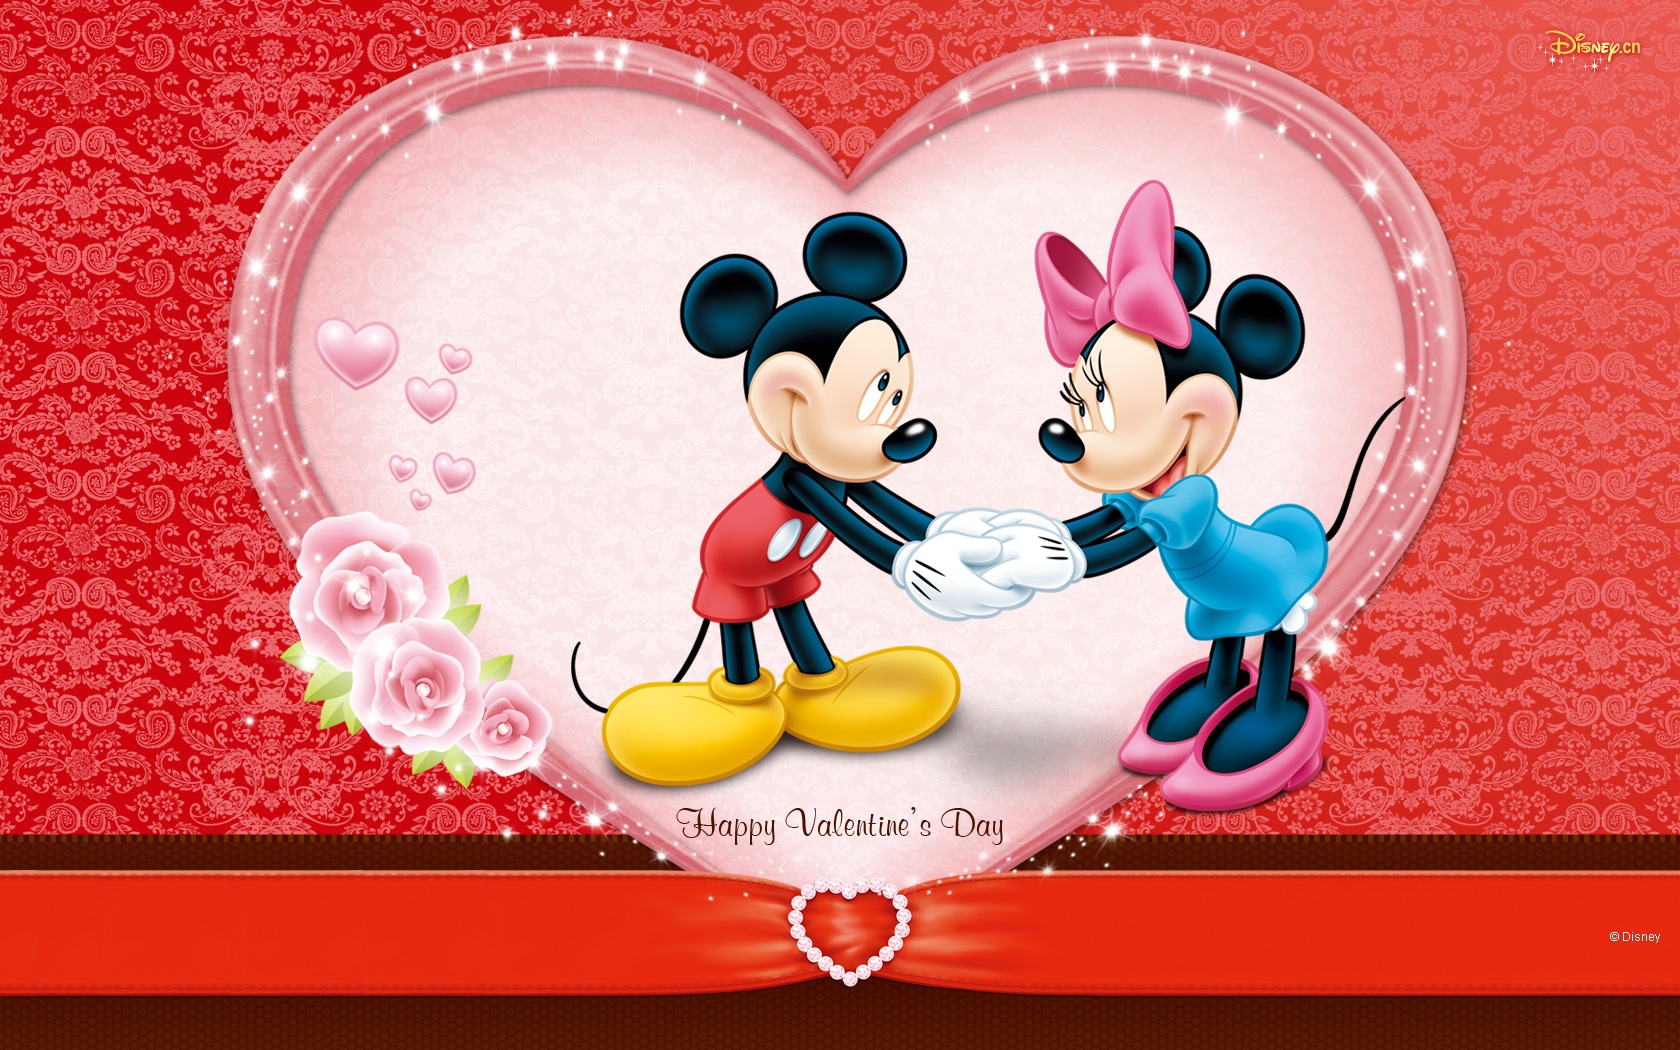 Cartoon Disney Heart Holiday Love Mickey Mouse Minnie Mouse Valentine 039 S Day 1680x1050